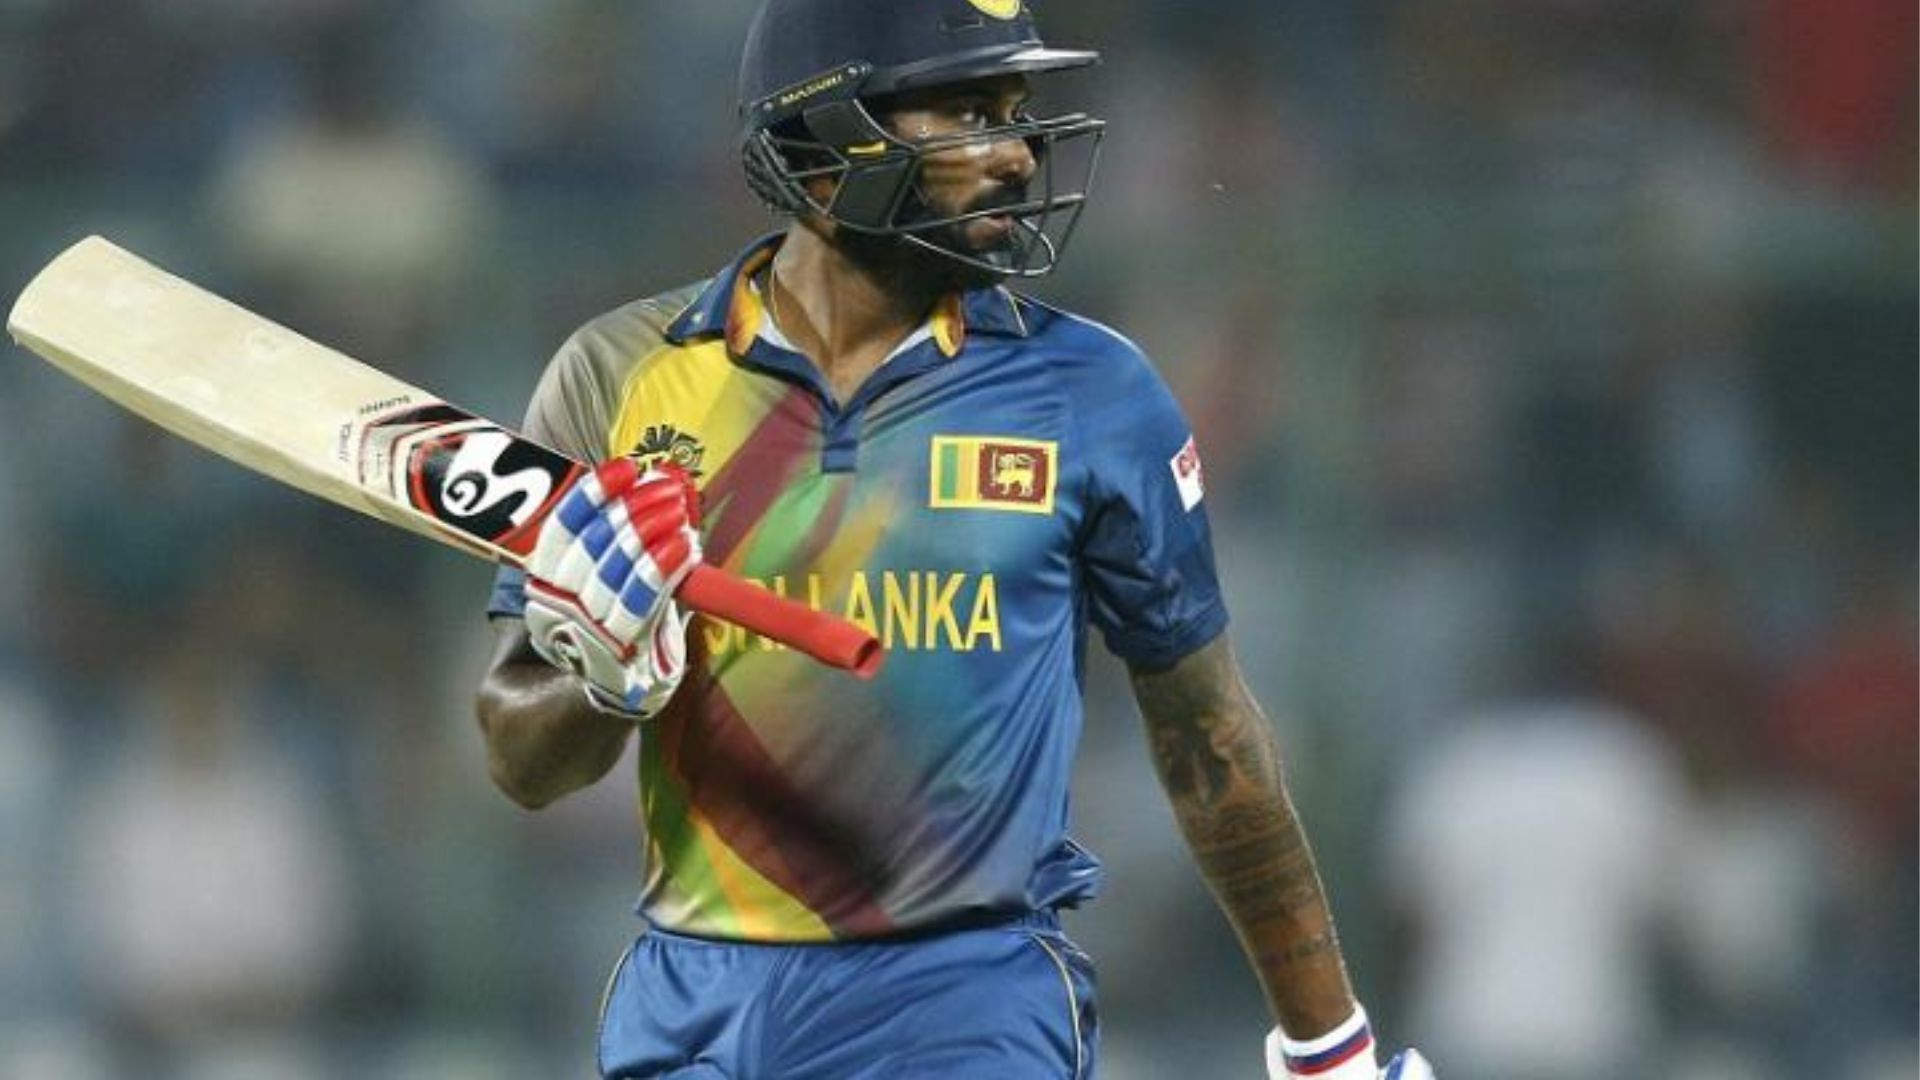 Chamara Kapugedera was part of the CSK outfit.